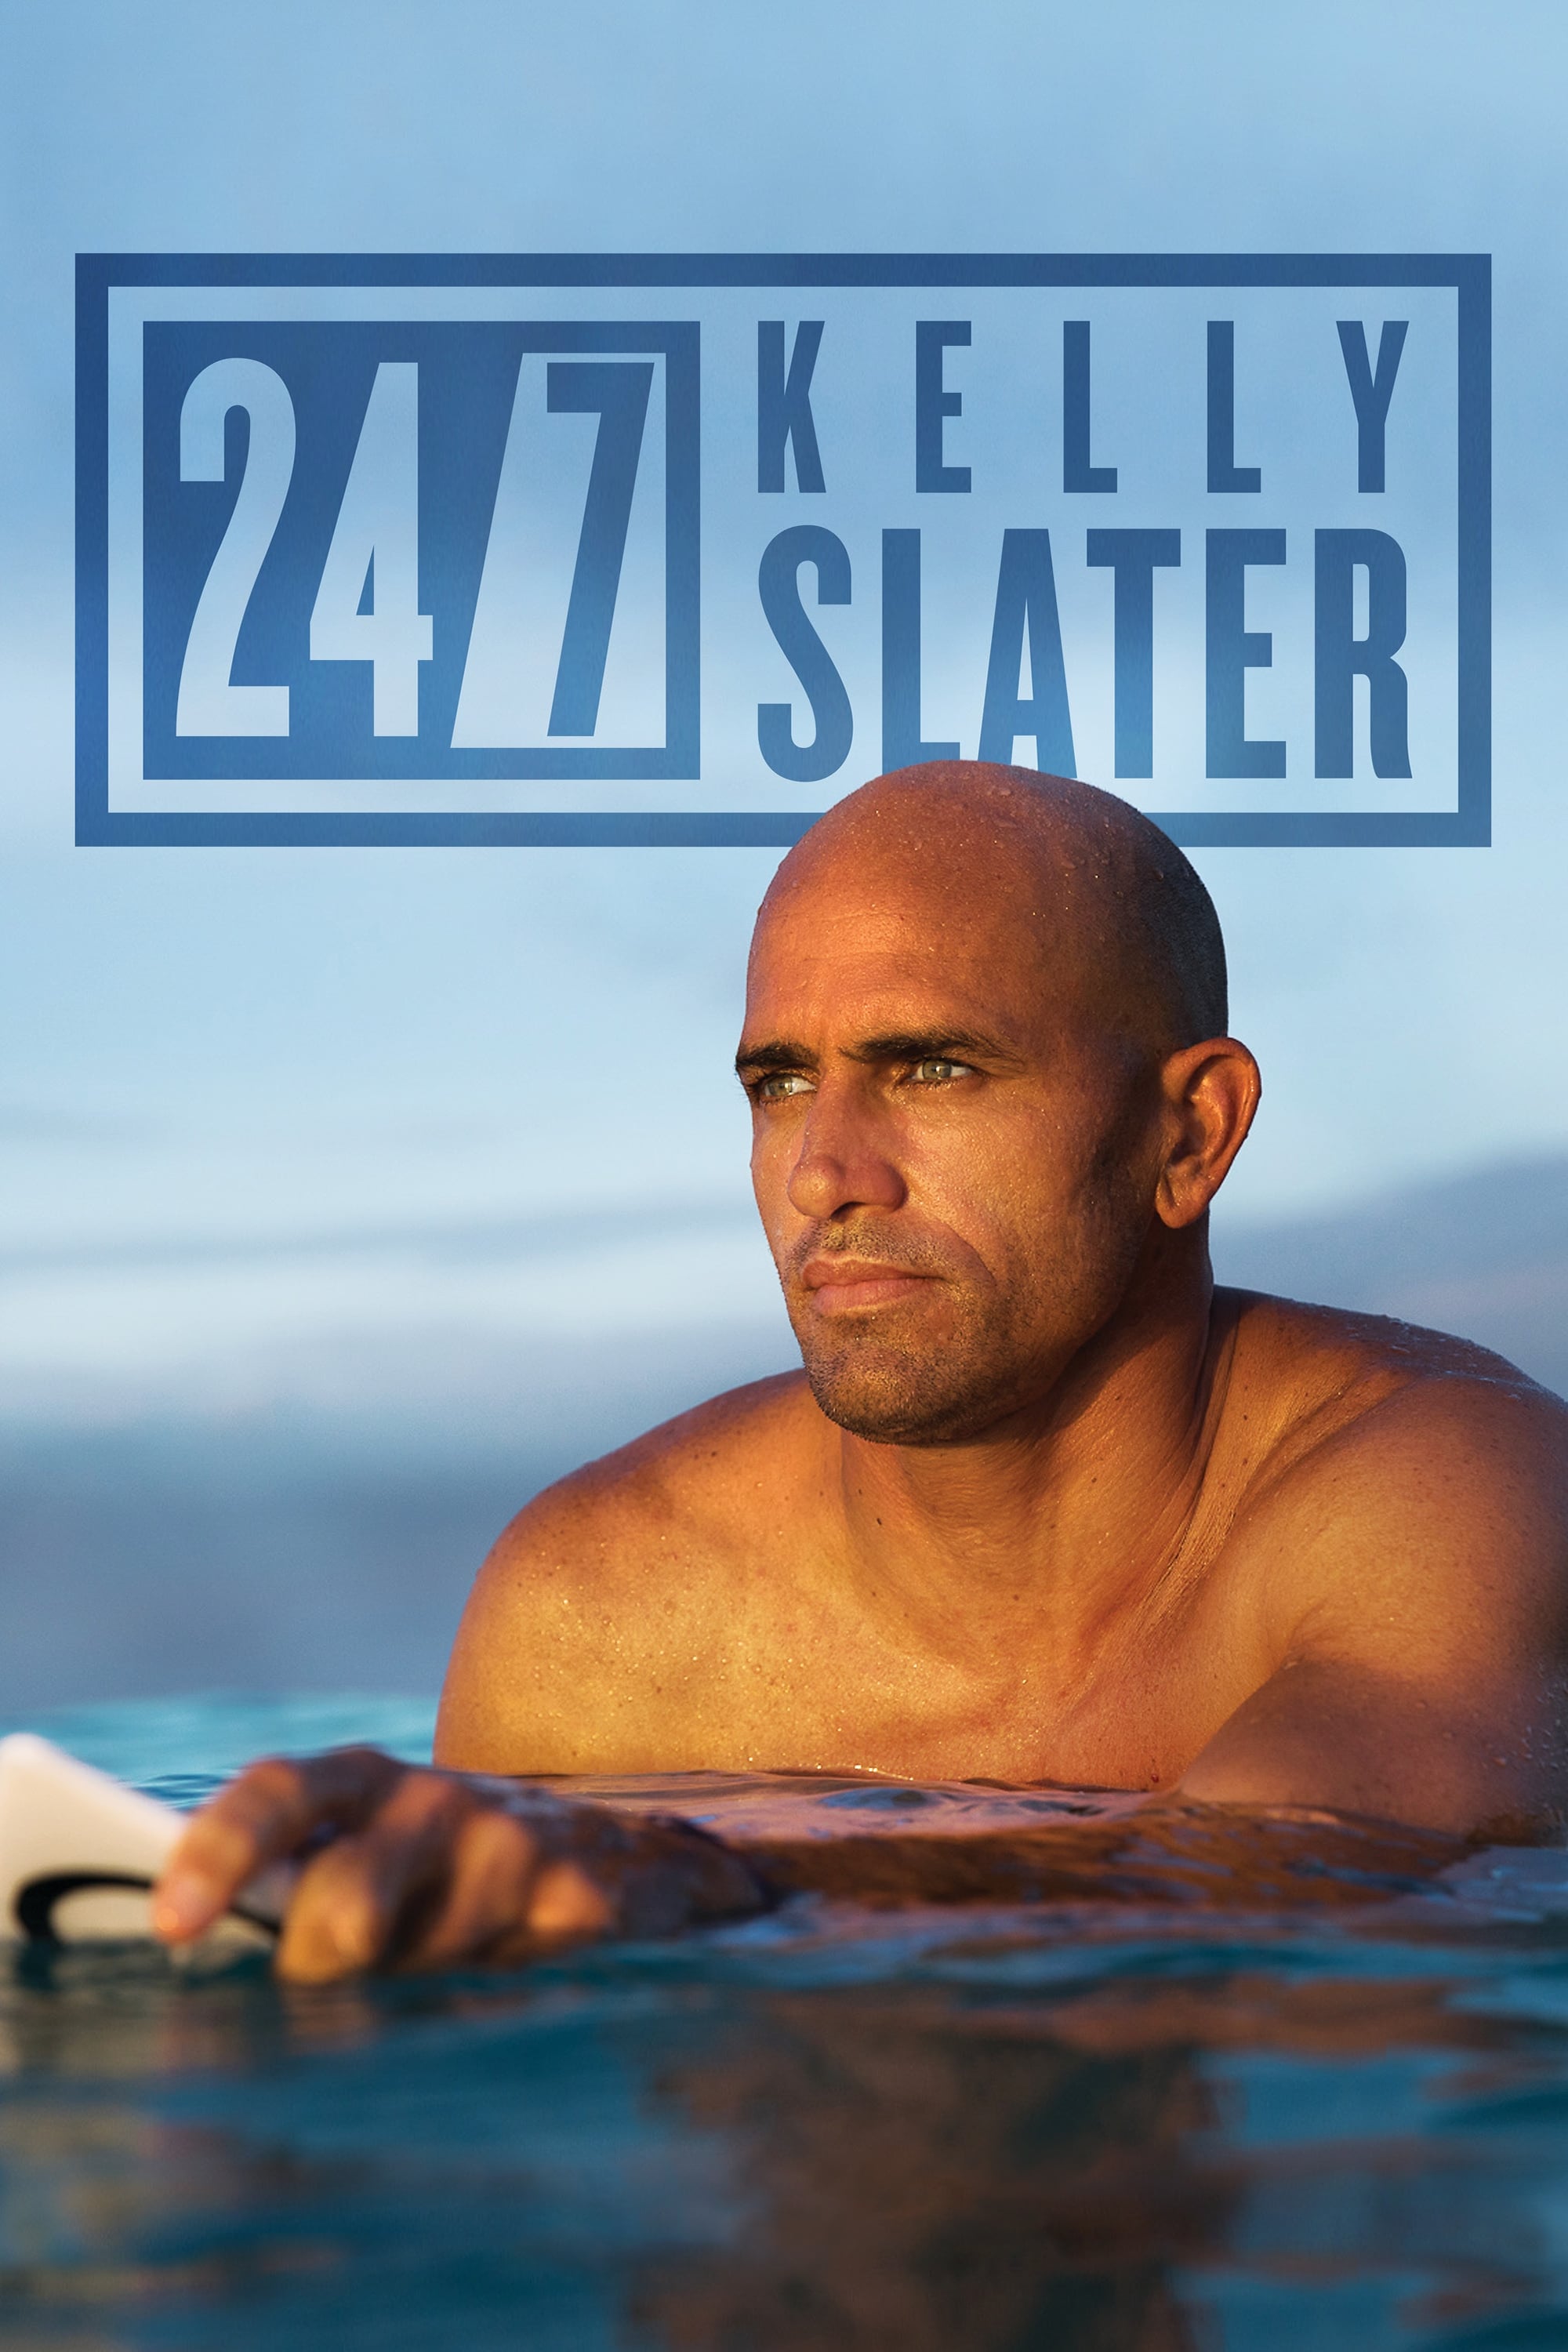 baywatch theme song kelly slater